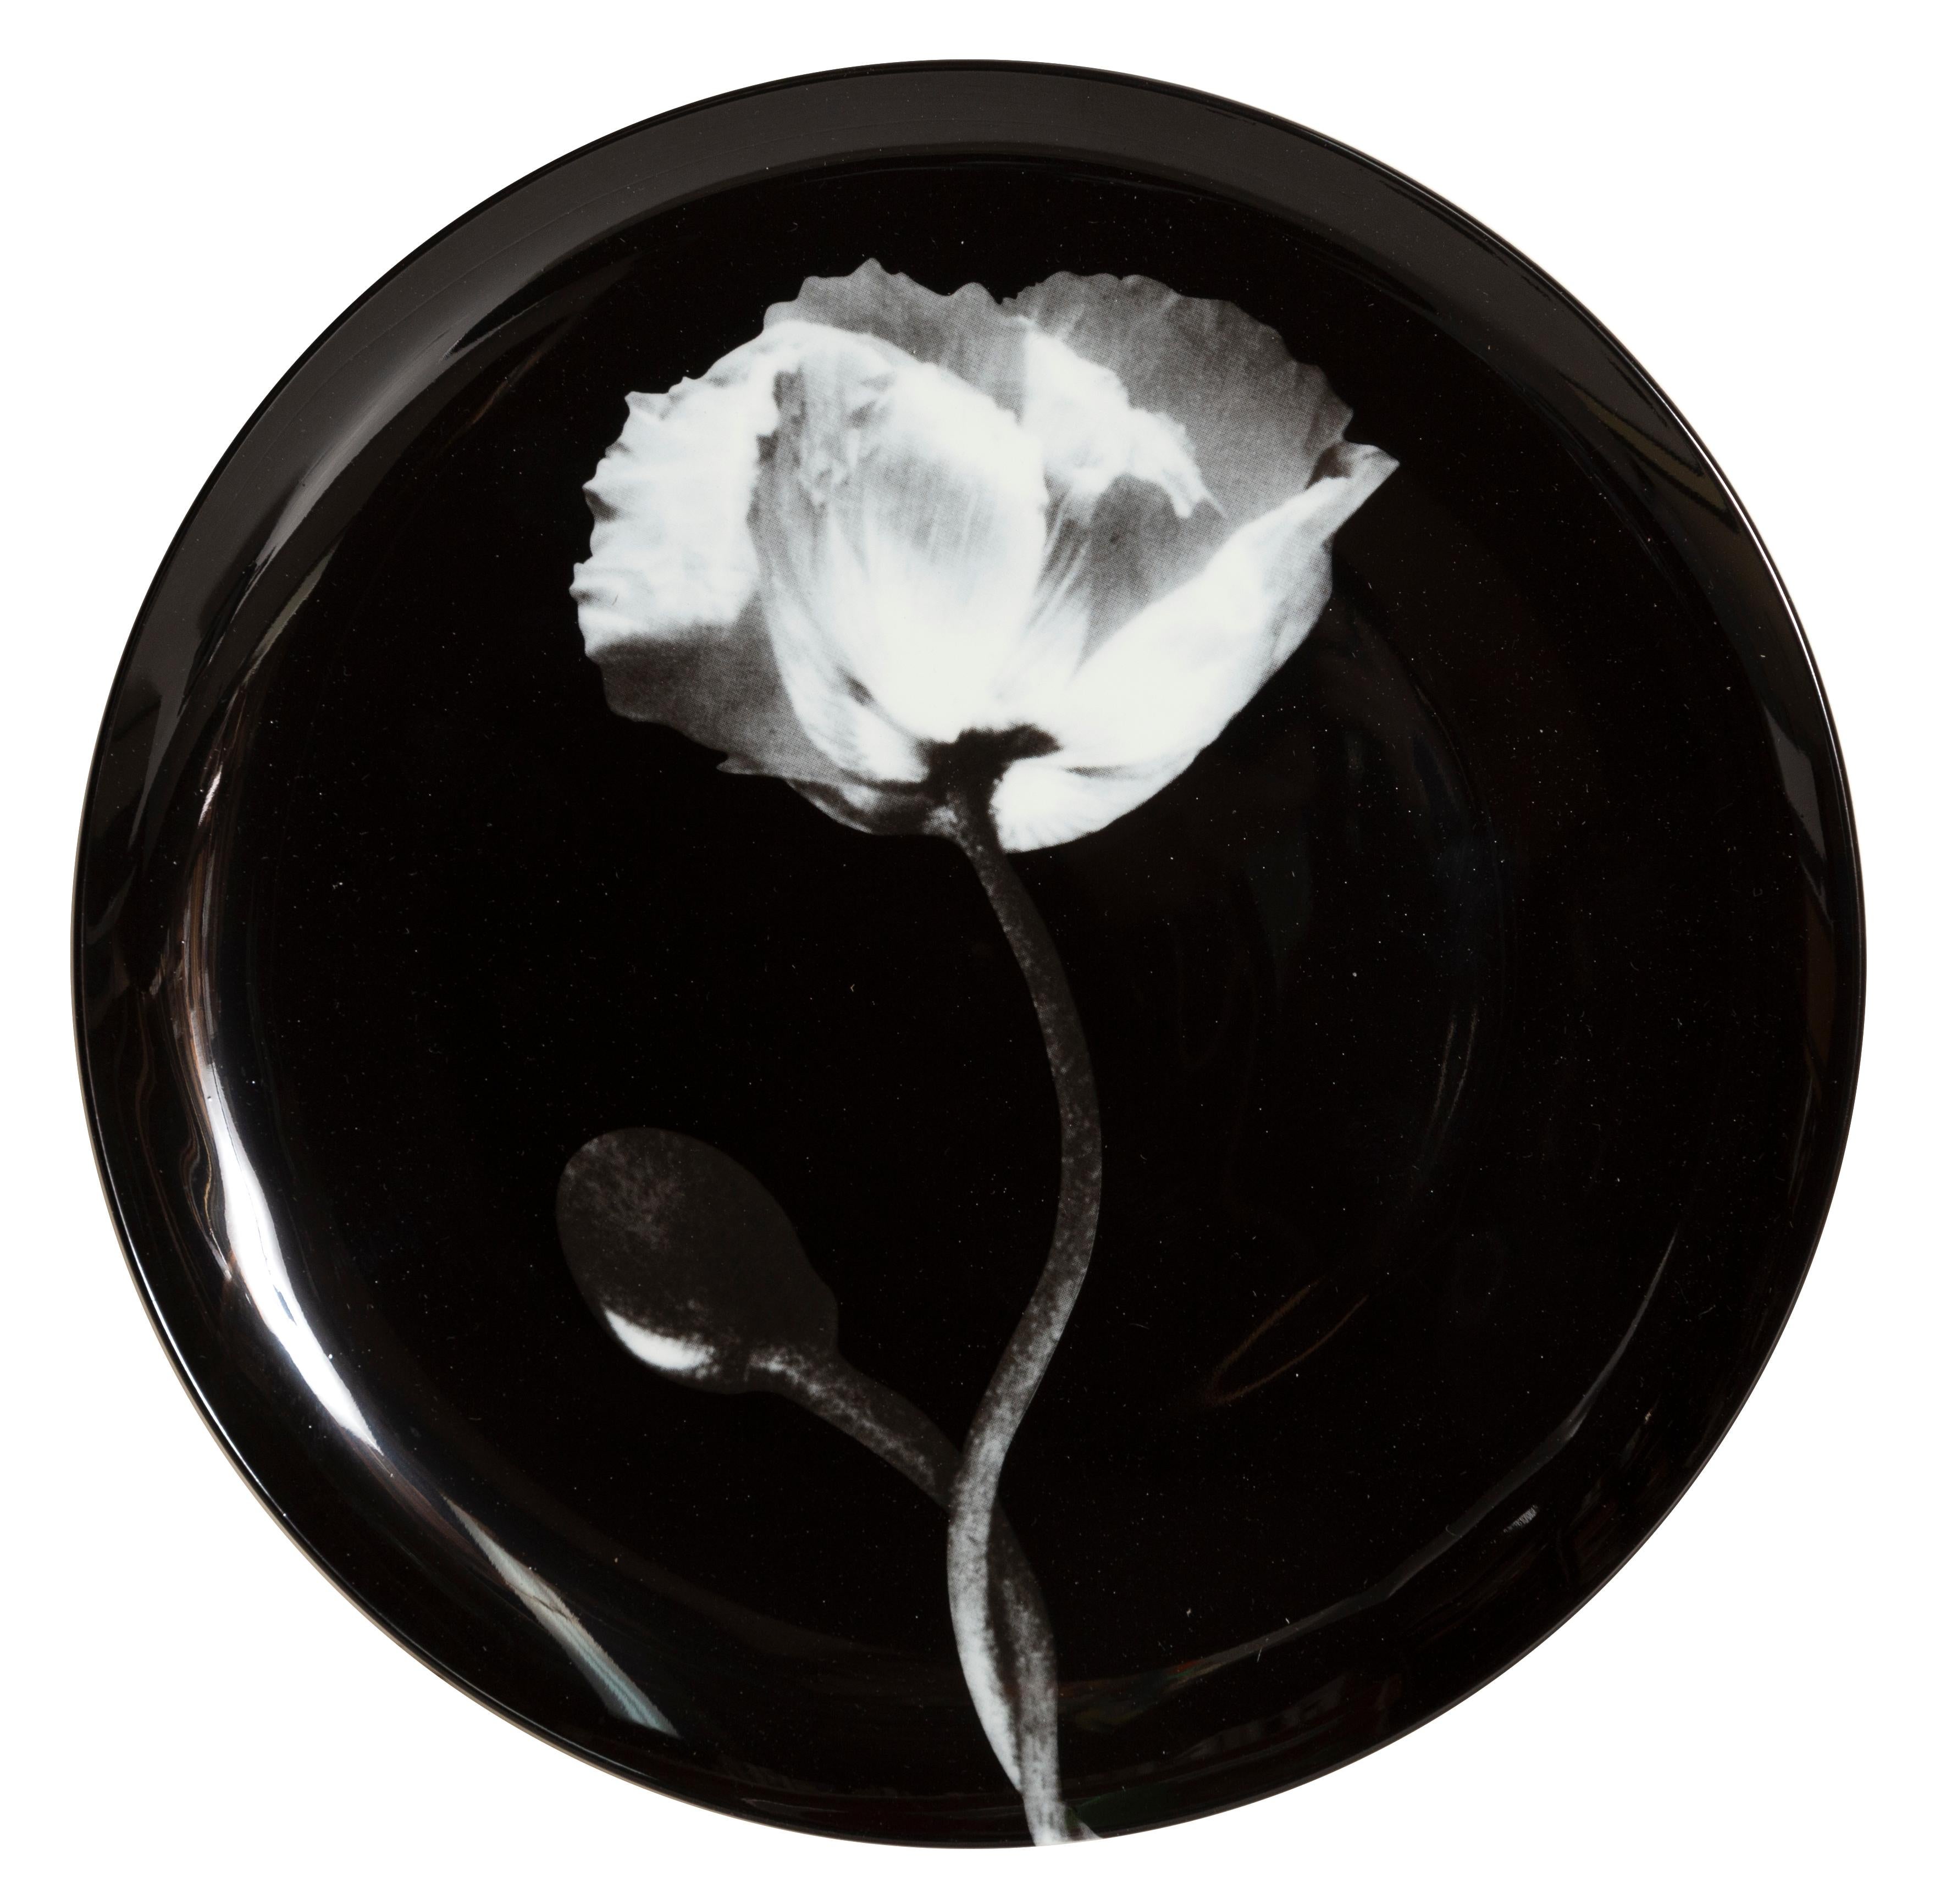 A pair of limited edition ceramic plates incorporating Robert Mapplethorpe’s Cala Lily and Poppy Flower photographic images. This set is new, plastic-wrapped in box, mint condition. Published by Nuit Blanche, Paris in conjunction with the Robert